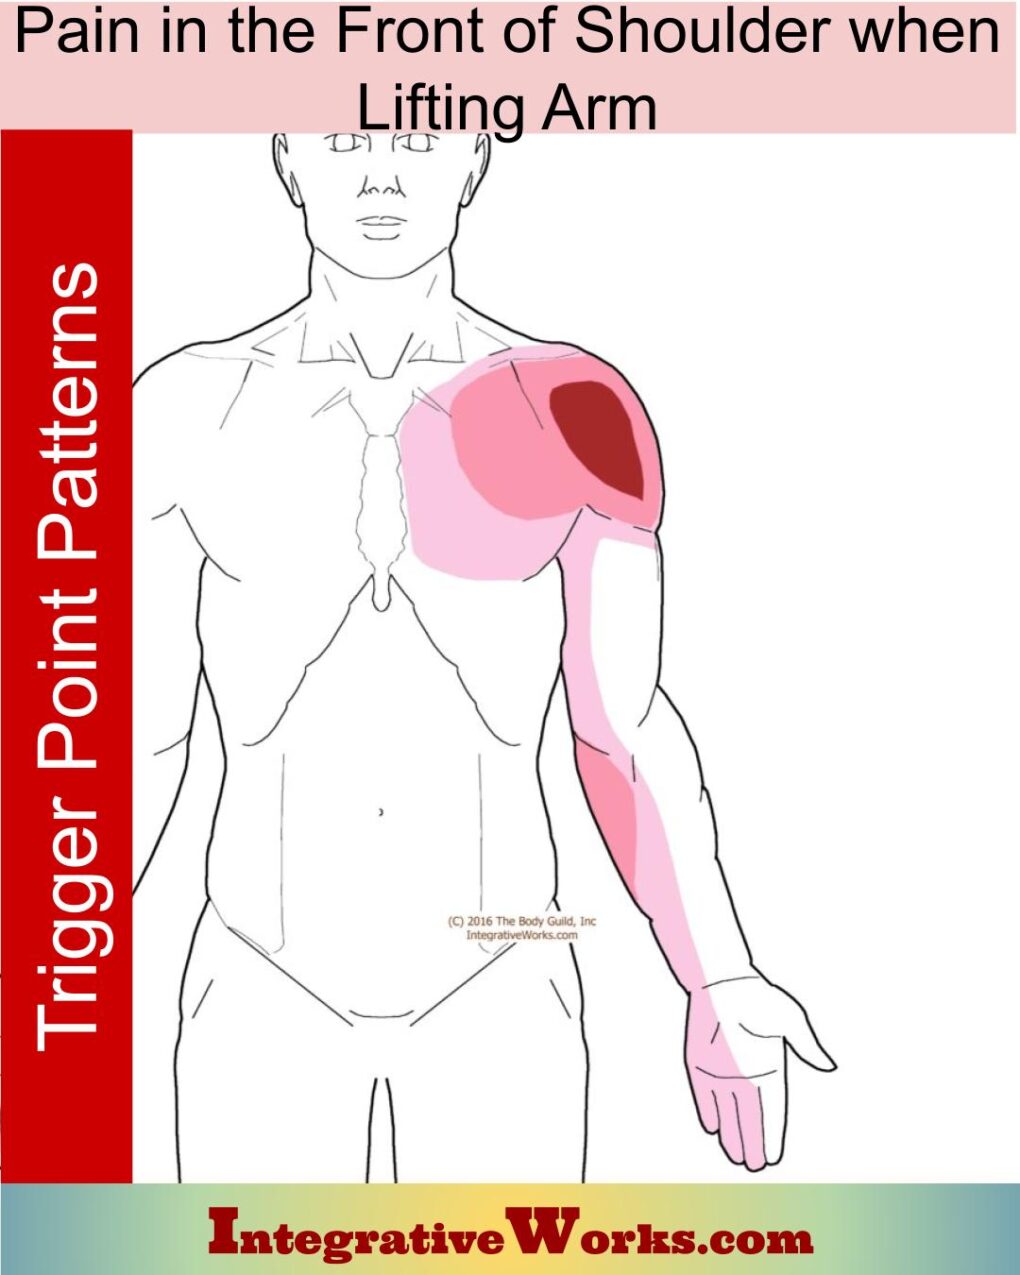 Pain in the Front of Shoulder When Lifting Arm - Integrative Works